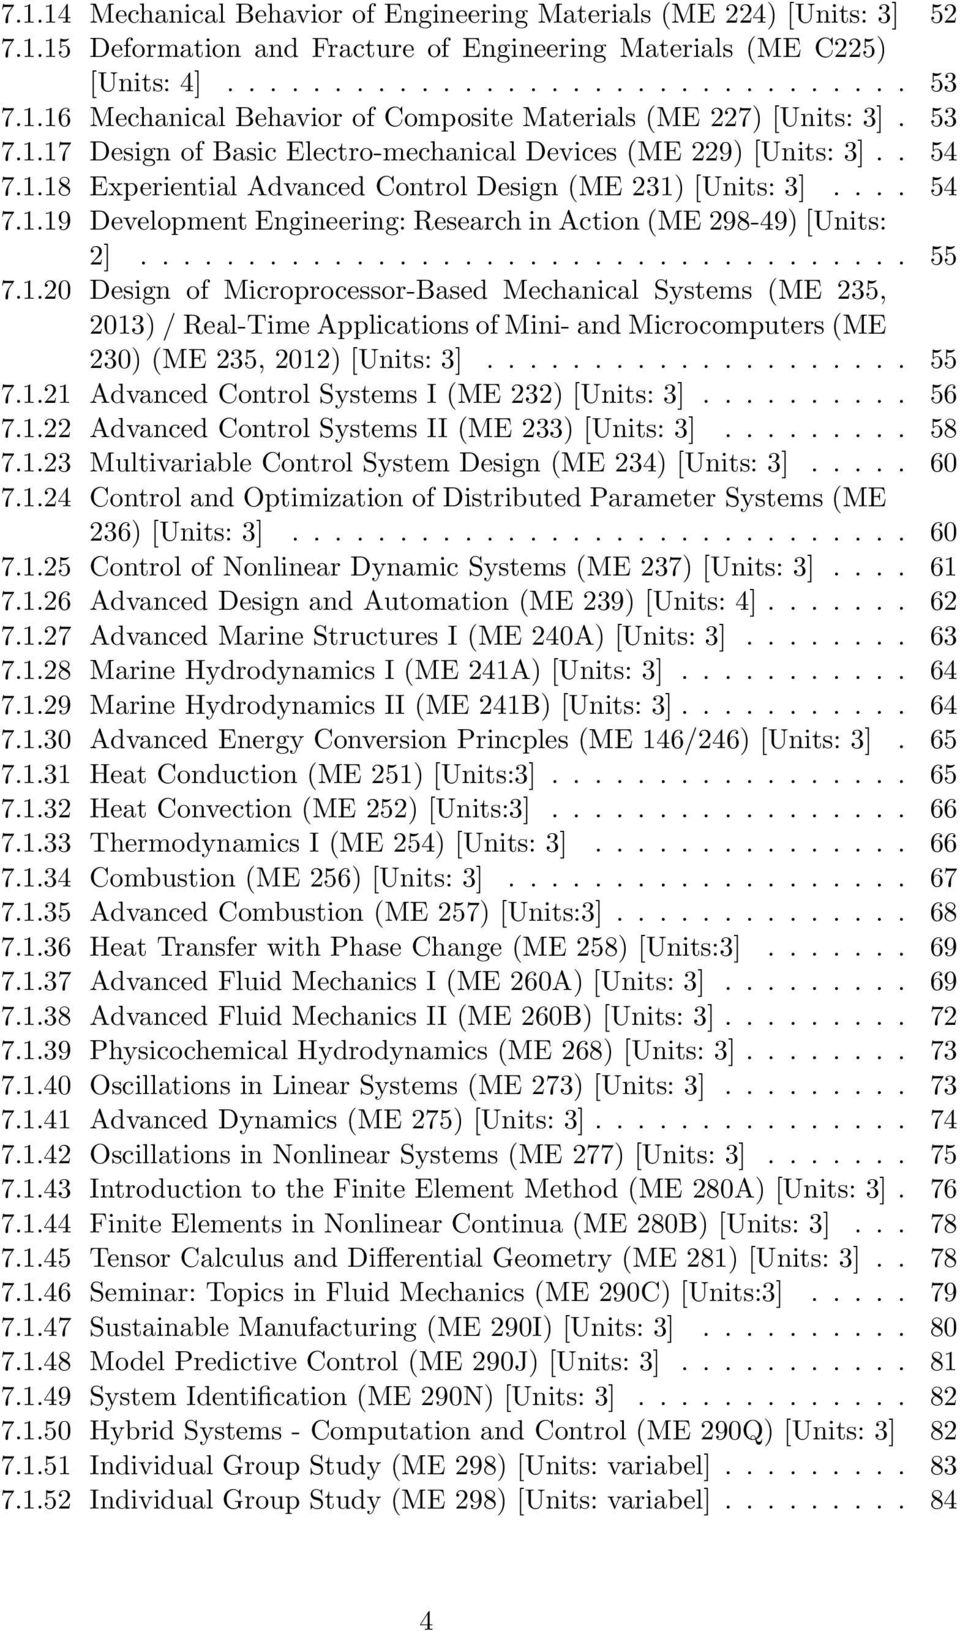 ................................... 55 7.1.20 Design of Microprocessor-Based Mechanical Systems (ME 235, 2013) / Real-Time Applications of Mini- and Microcomputers (ME 230) (ME 235, 2012) [Units: 3].